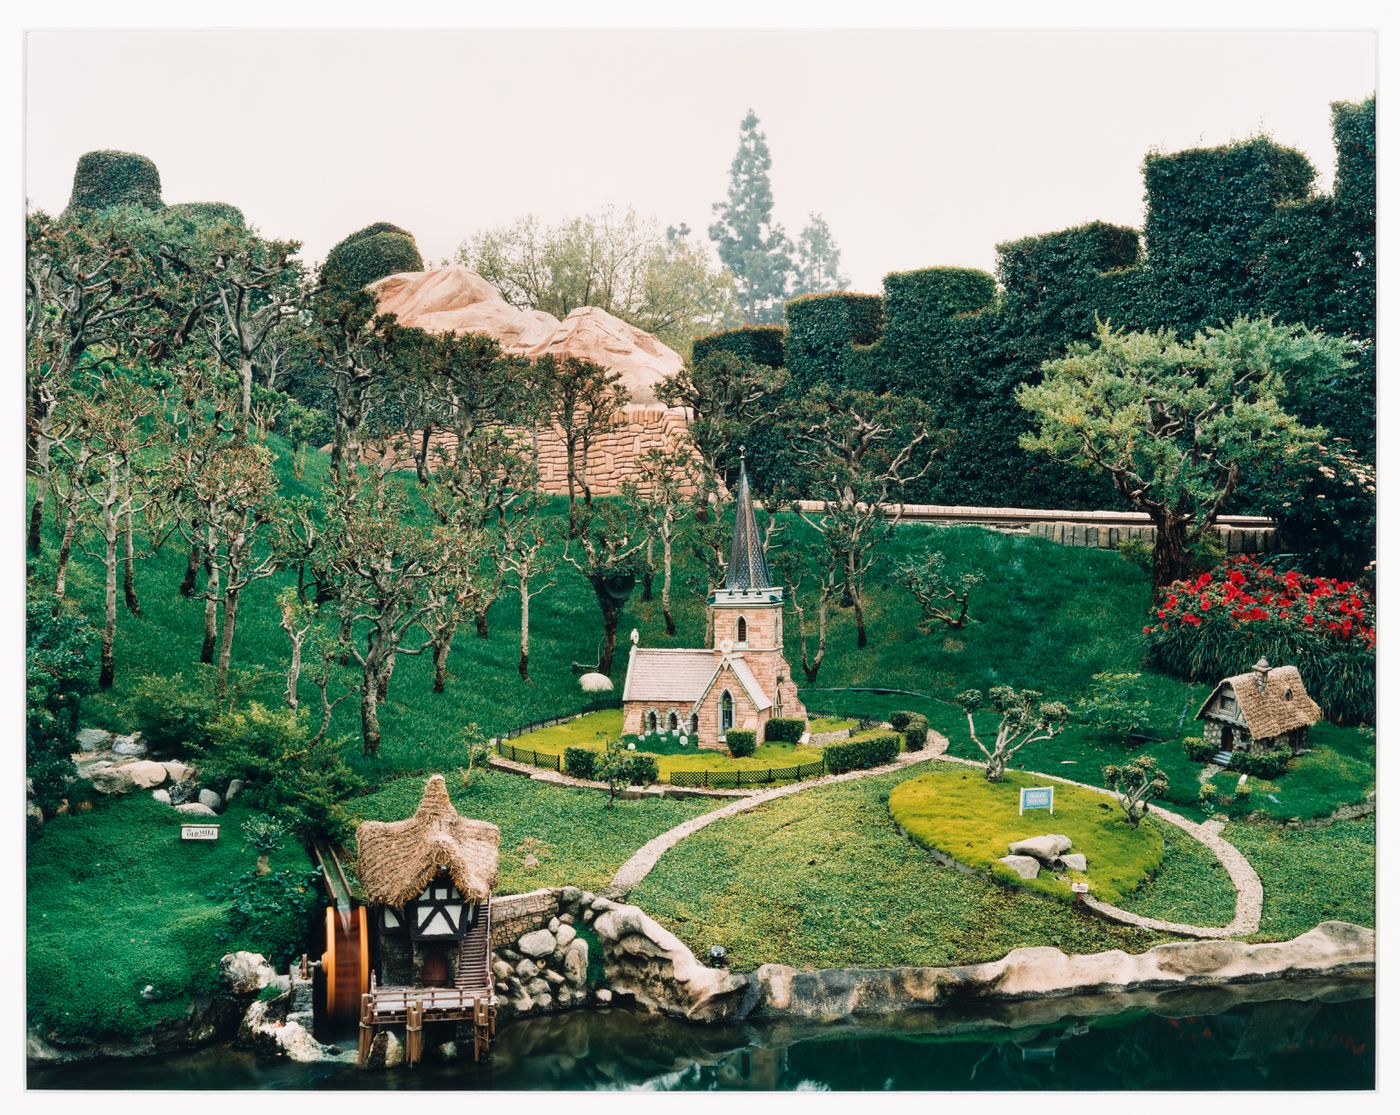 View of Storybook Land showing miniature church, house and old mill on artificial stretch of water, Disneyland, Anaheim, California